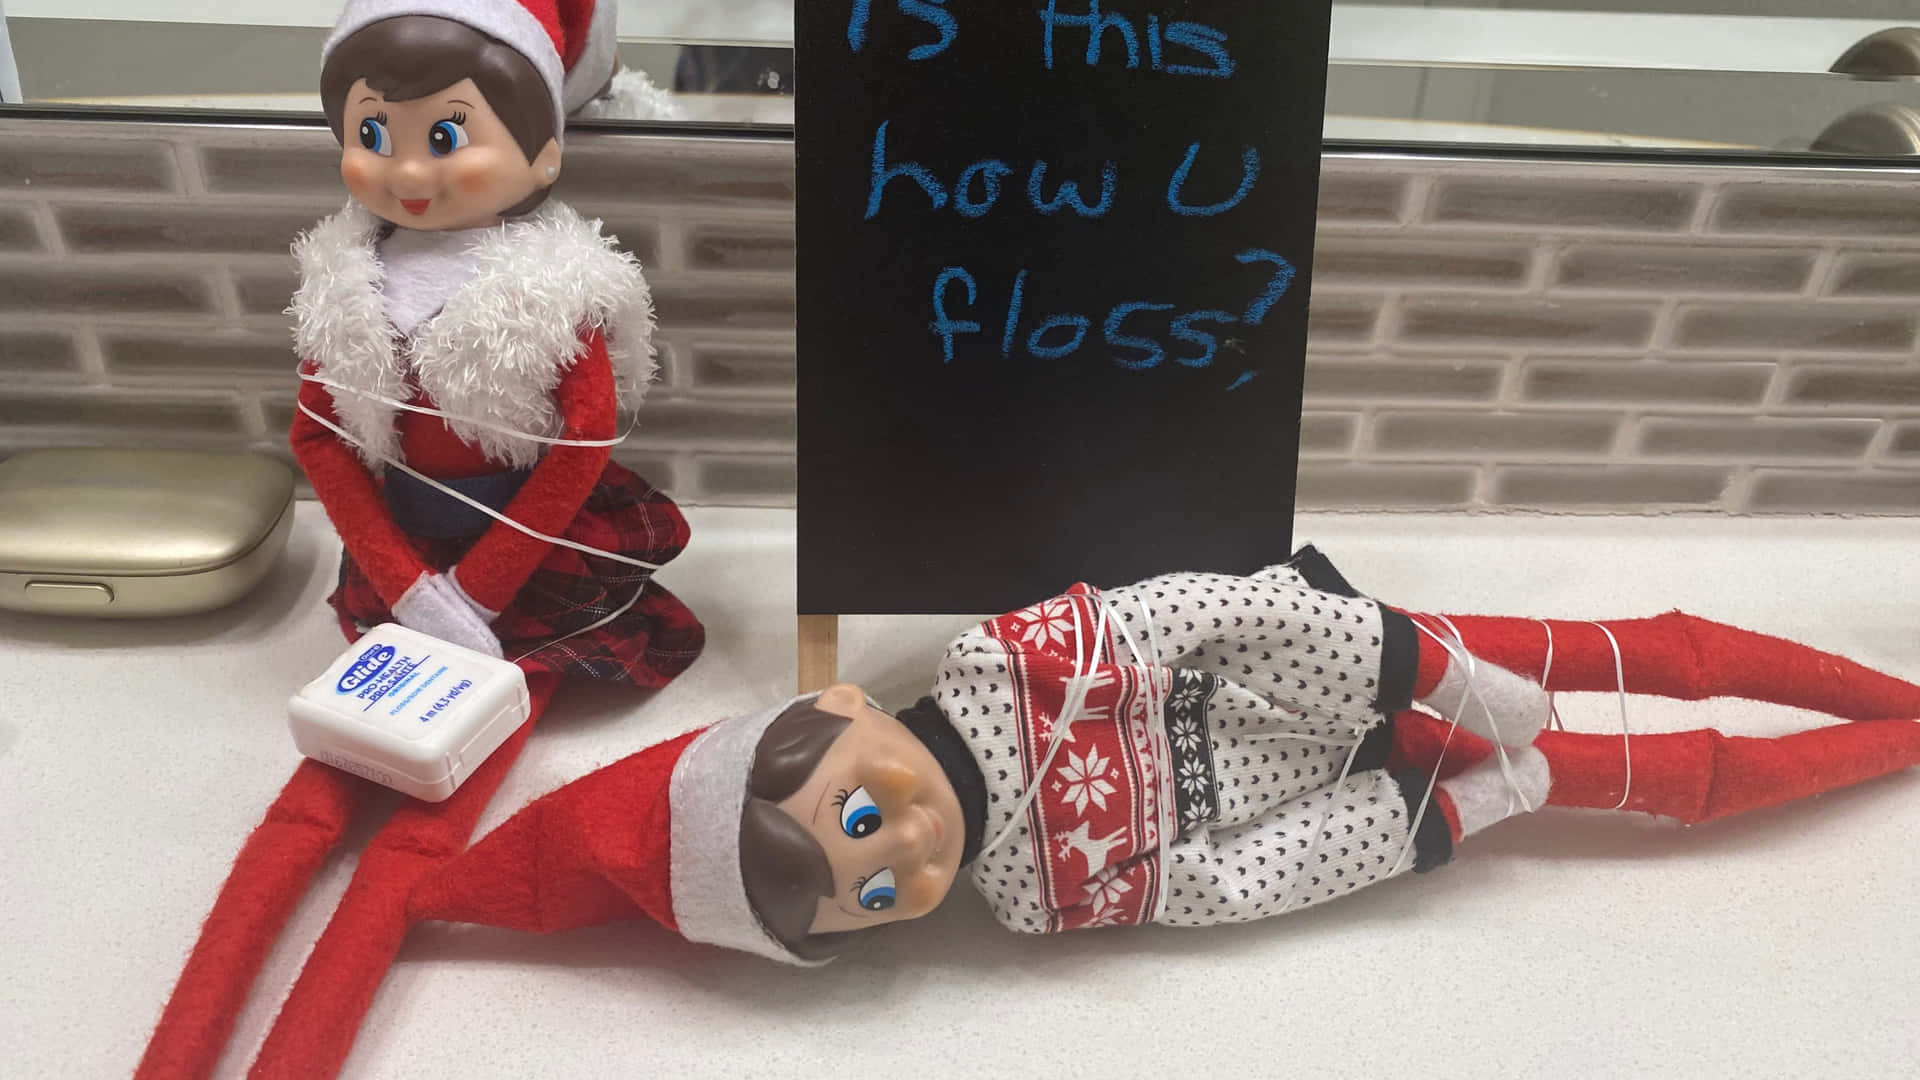 Elf On The Shelf With A Sign Saying How U Floss